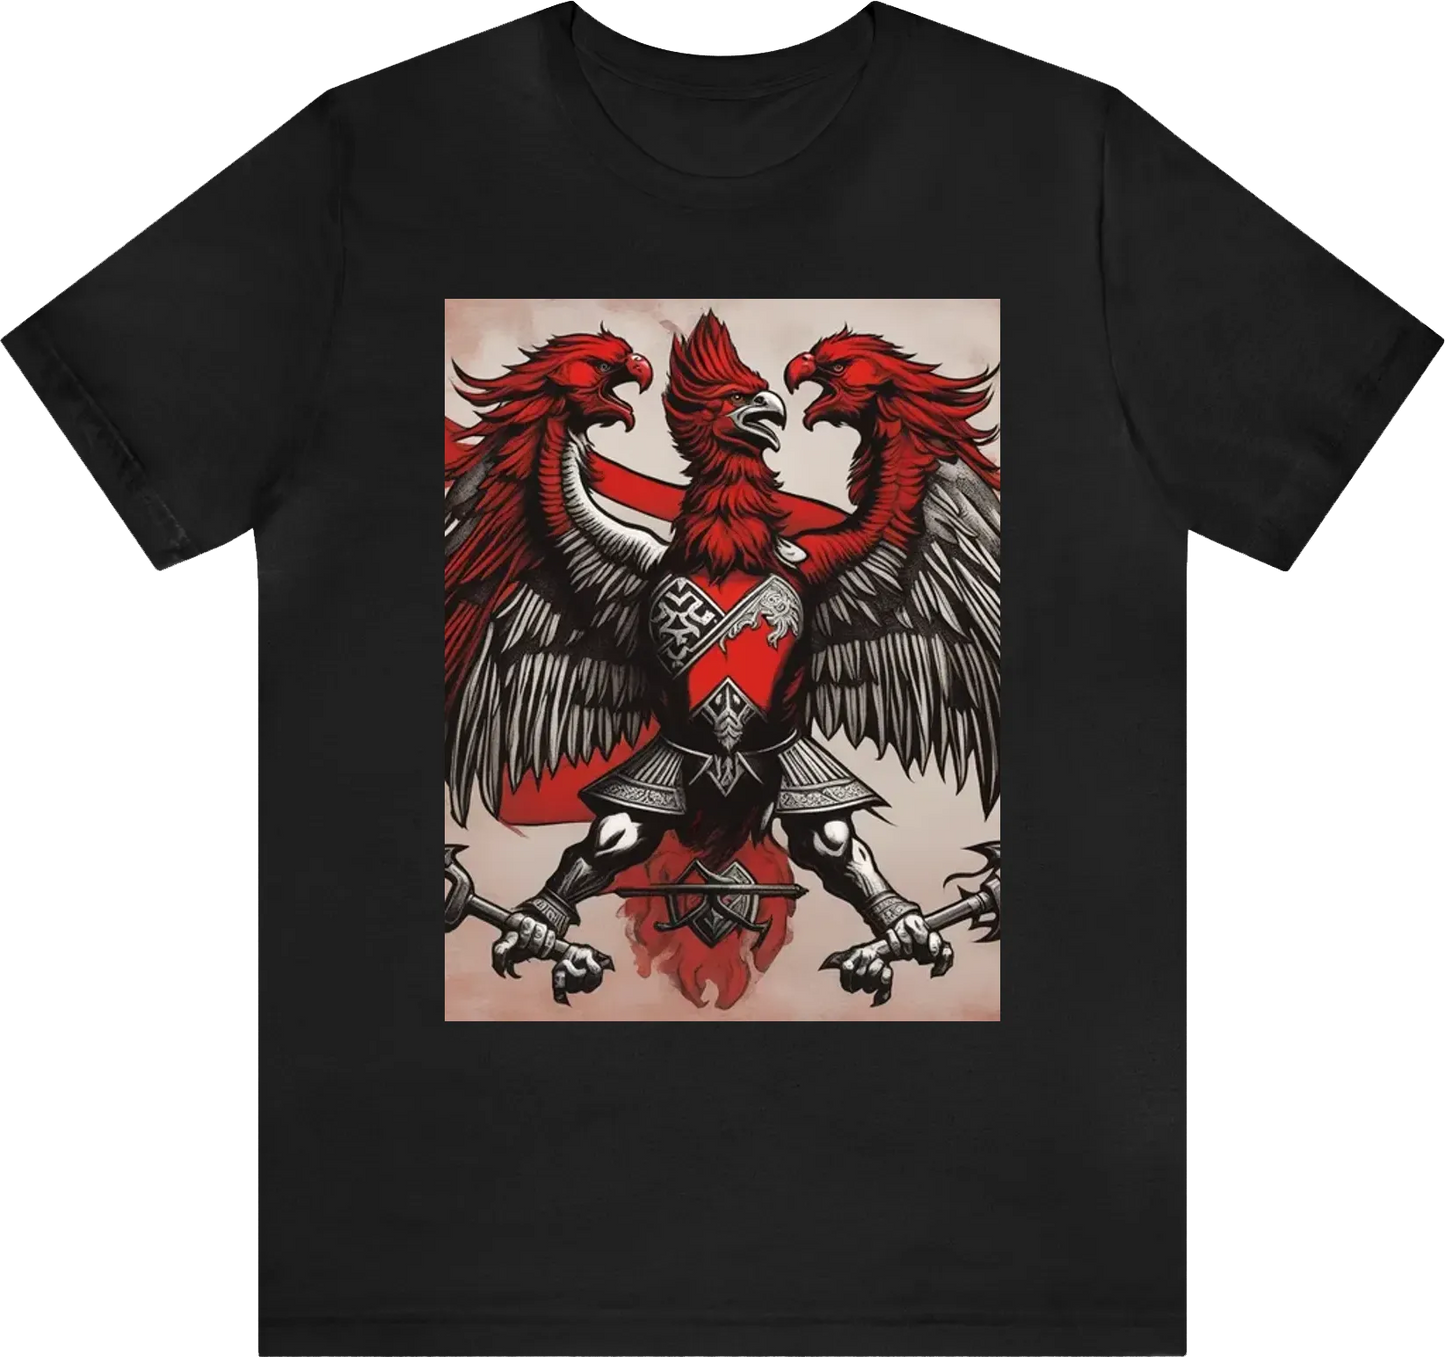 Albanian illyrian warrior red and black two headed eagle